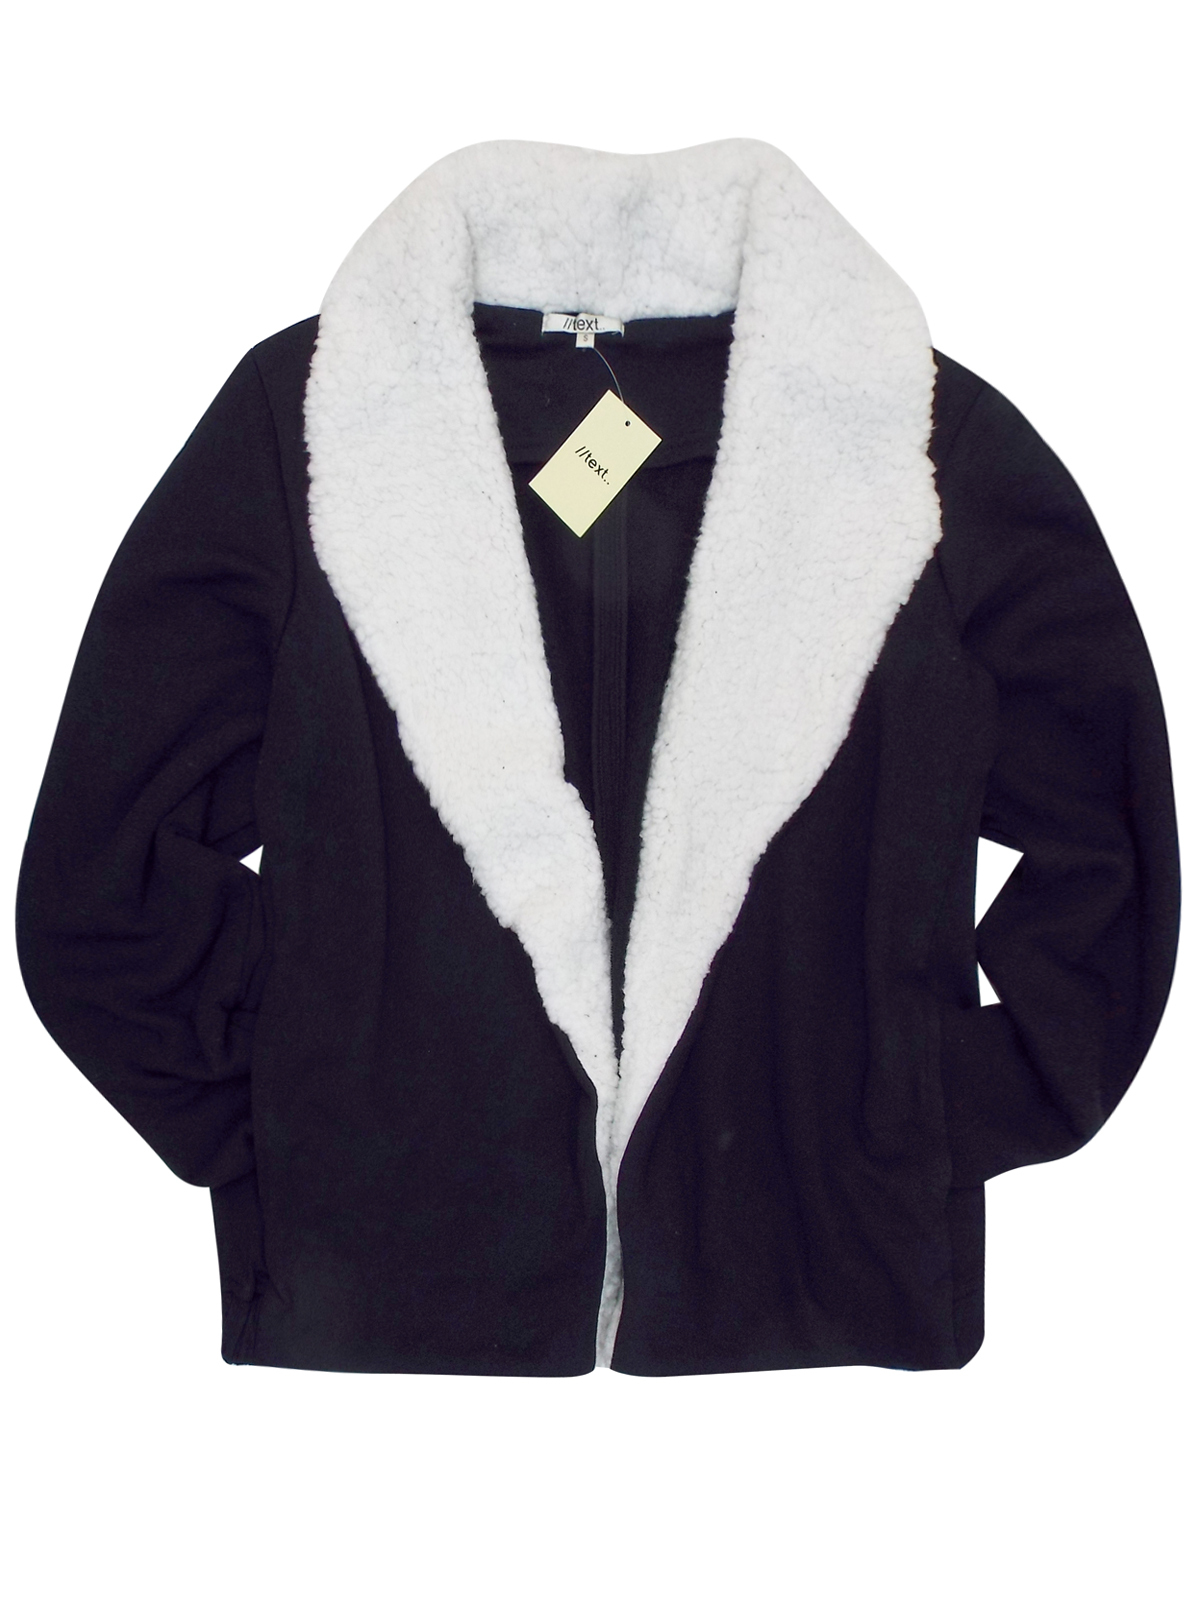 //text.. - - BLACK Fleece Shawl Collar Open Front Jacket - Size 12 to ...